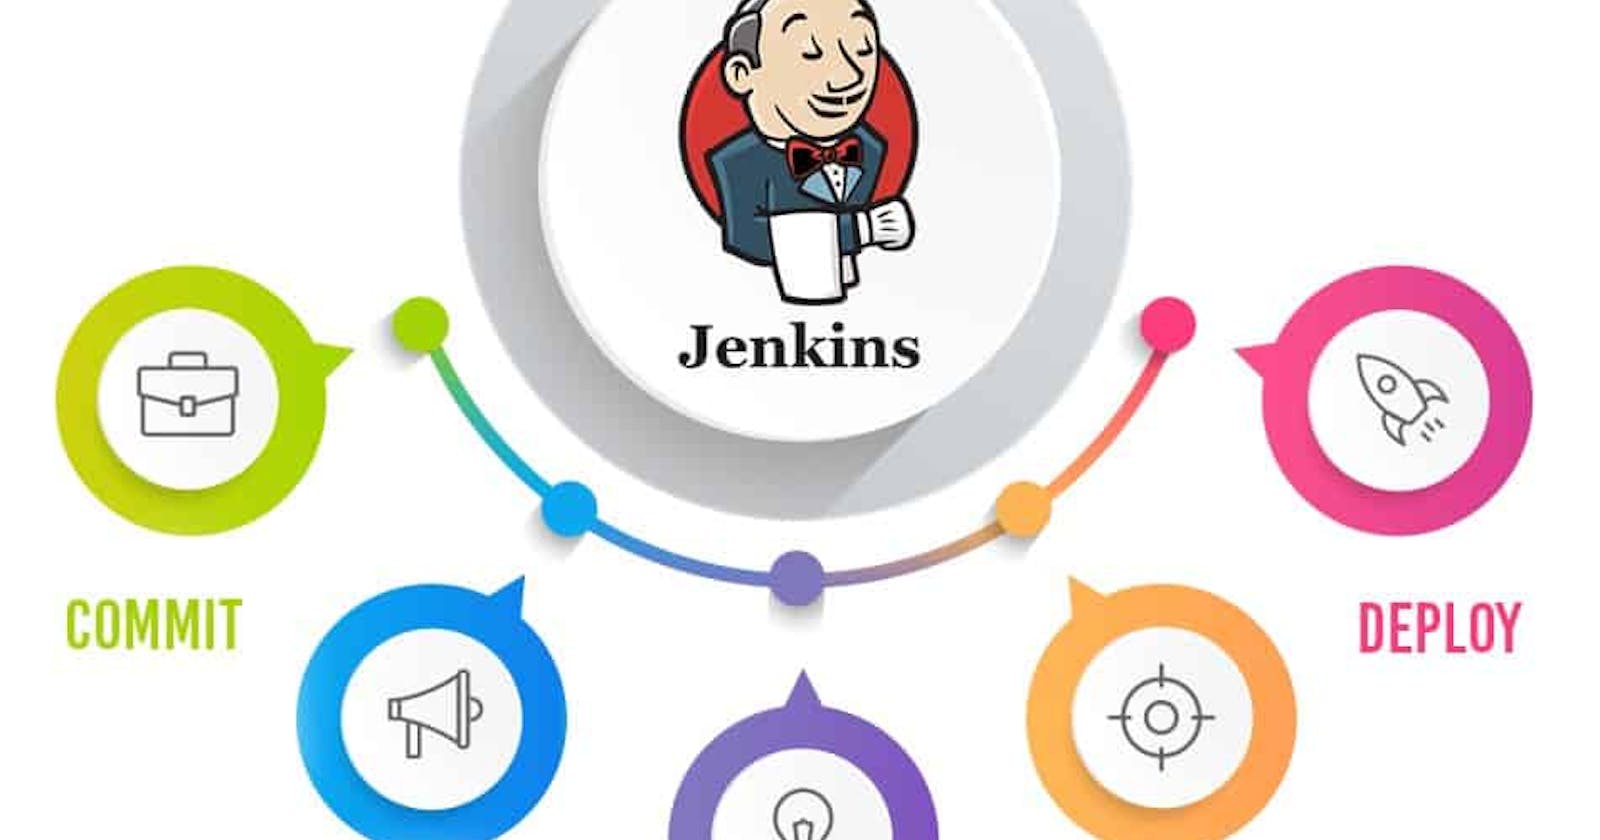 Jenkins Blog's Basic To Advanced With a Project